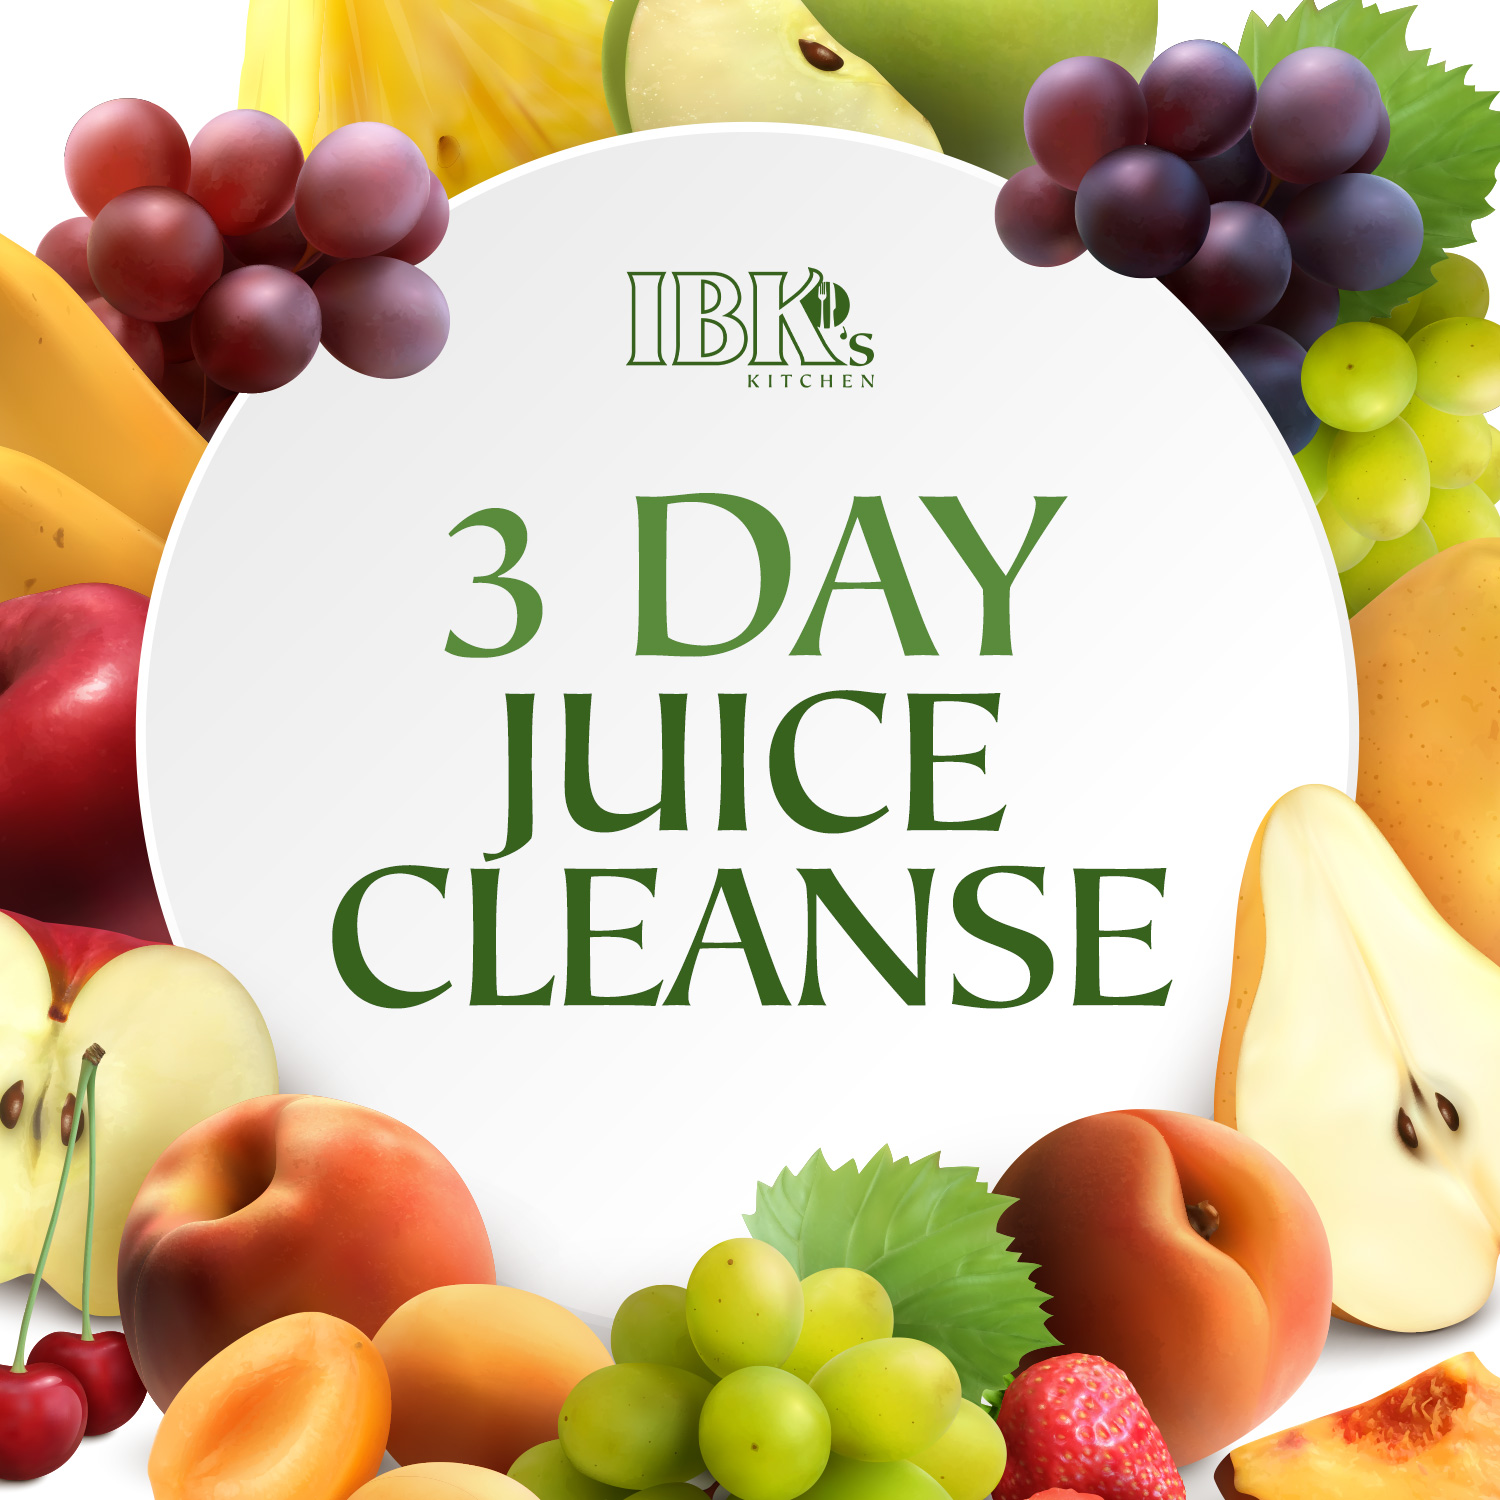 3 Day Juice Cleanse Ibk S Kitchen